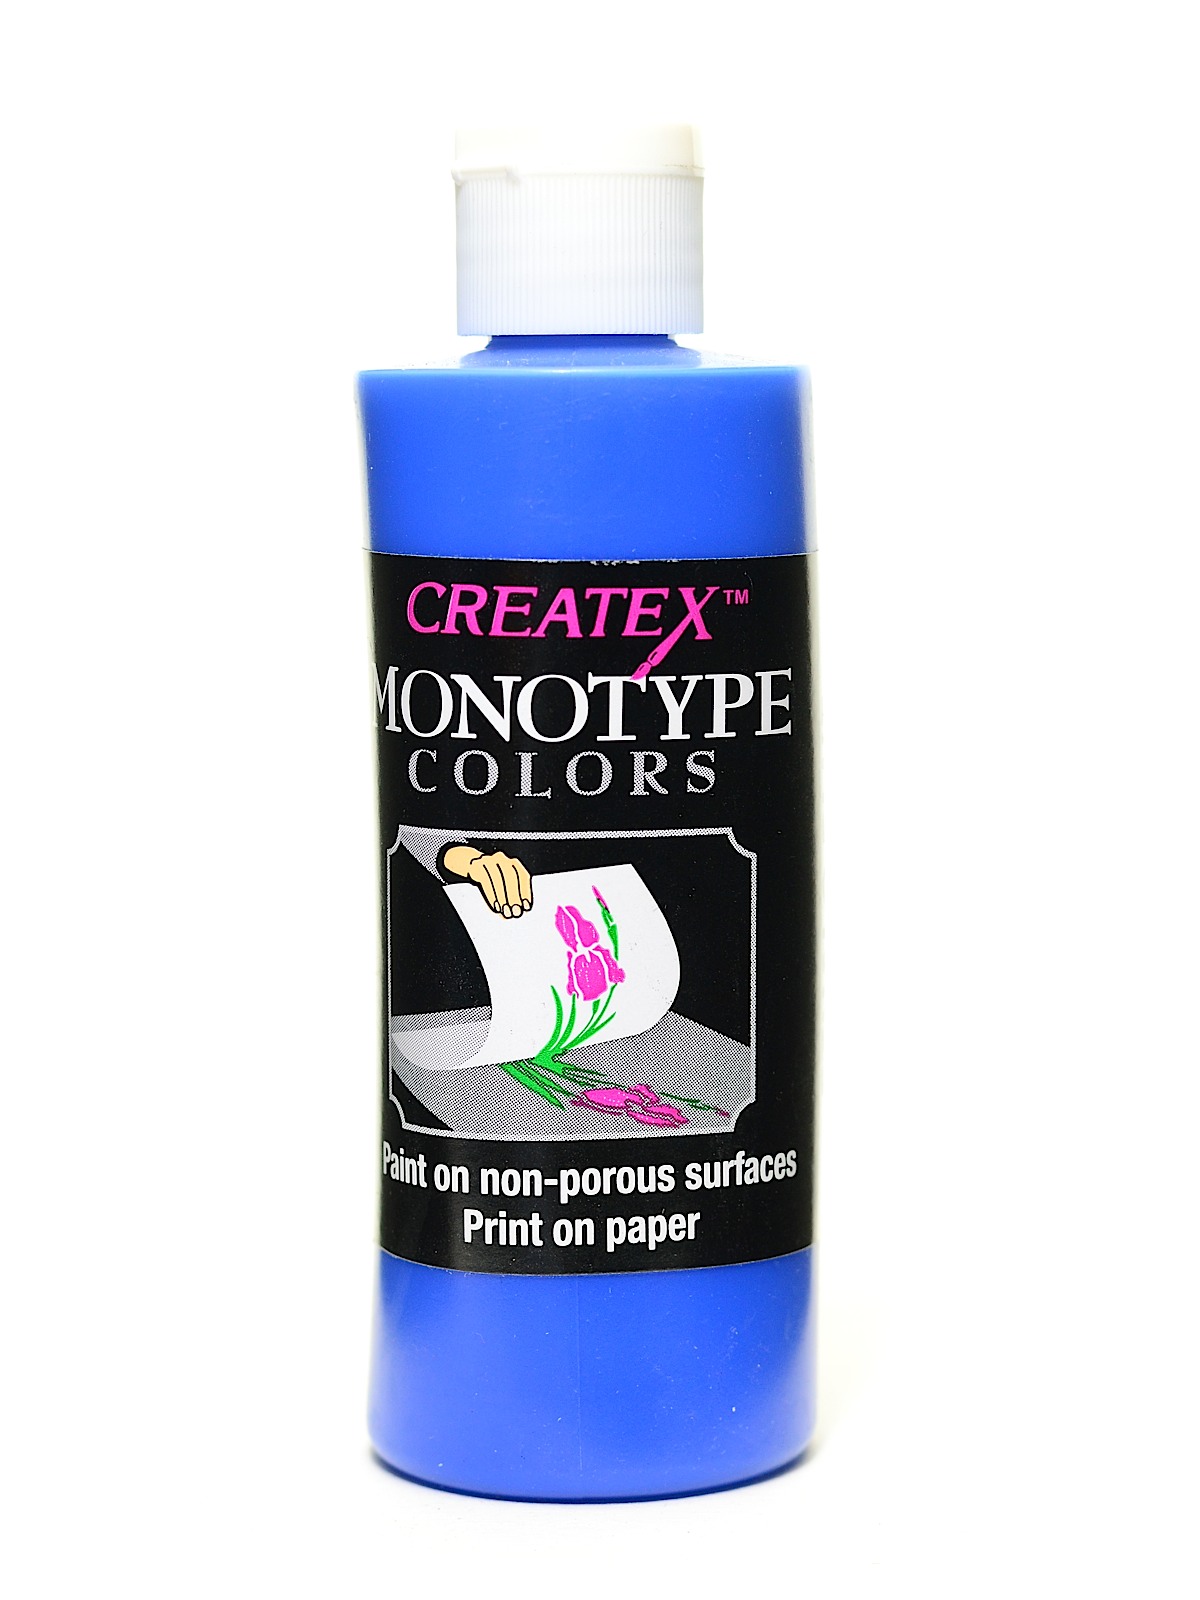 Monotype Colors Phthalo Blue 4 Oz.